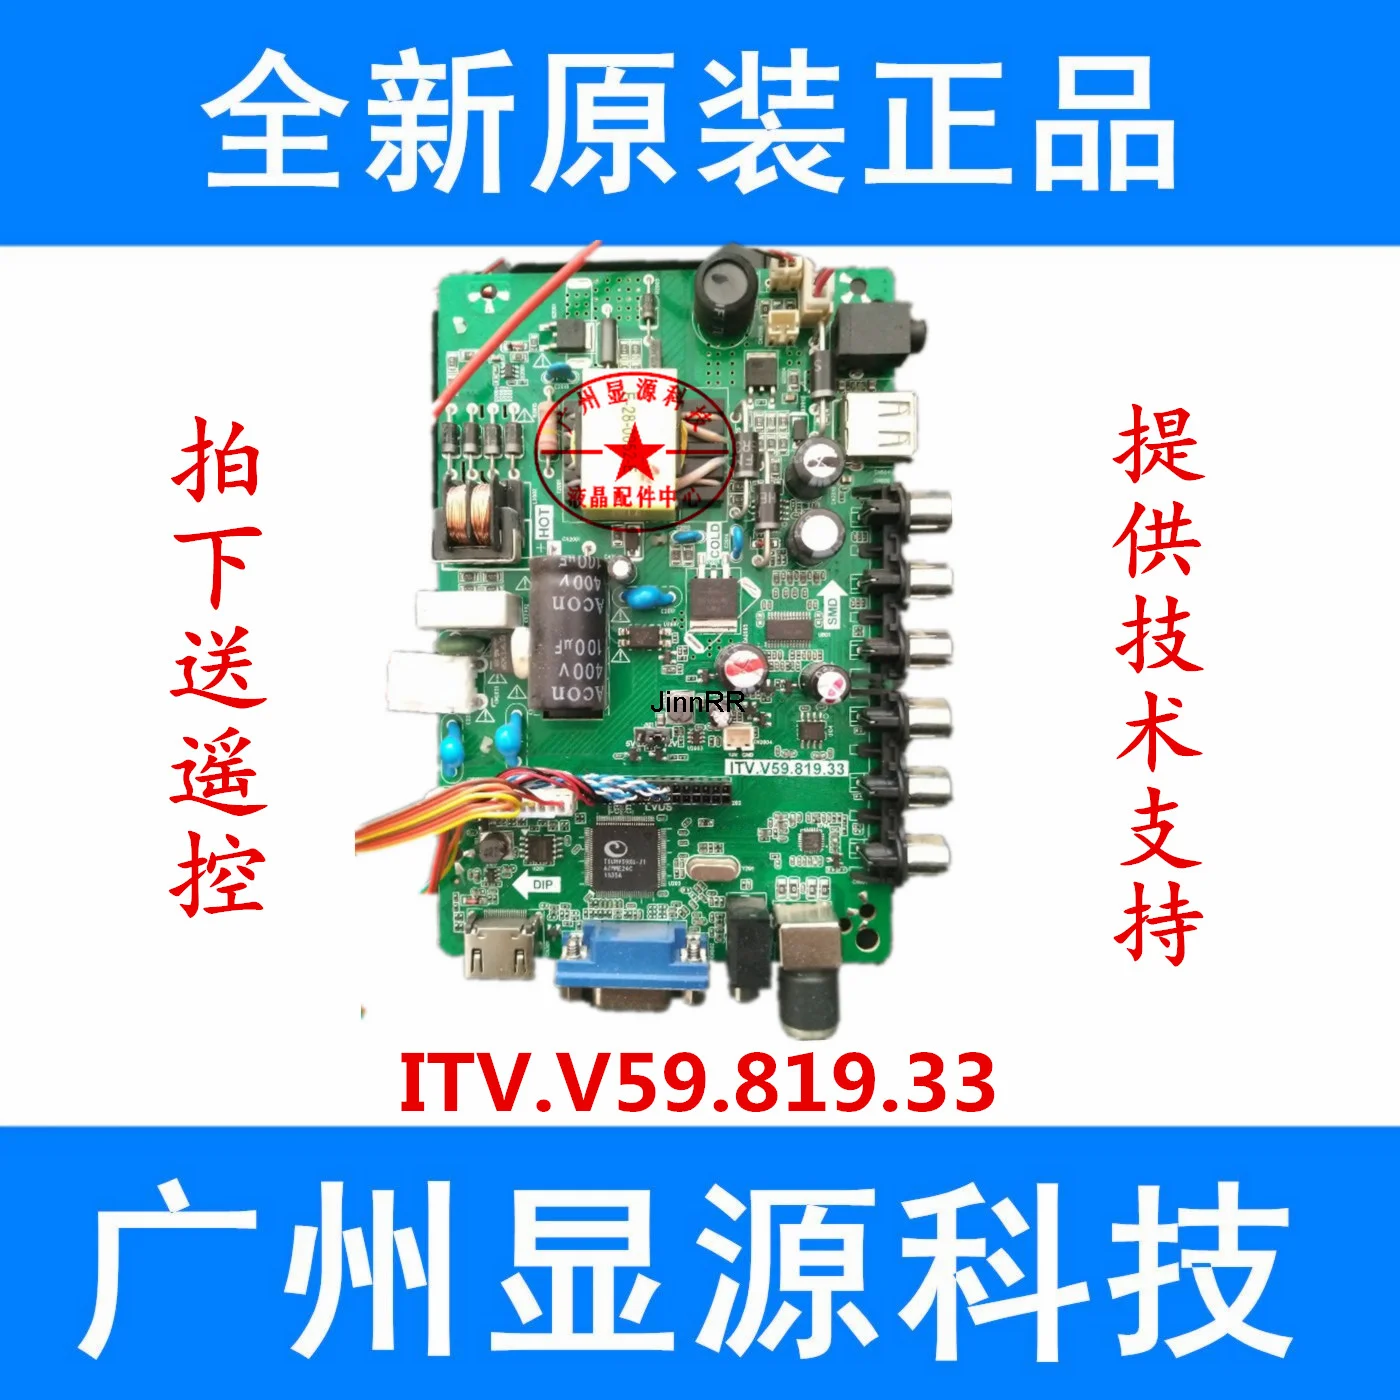 

New original universal motherboard / ITV V59. 819.33/ provide technical support and can be equipped with any screen